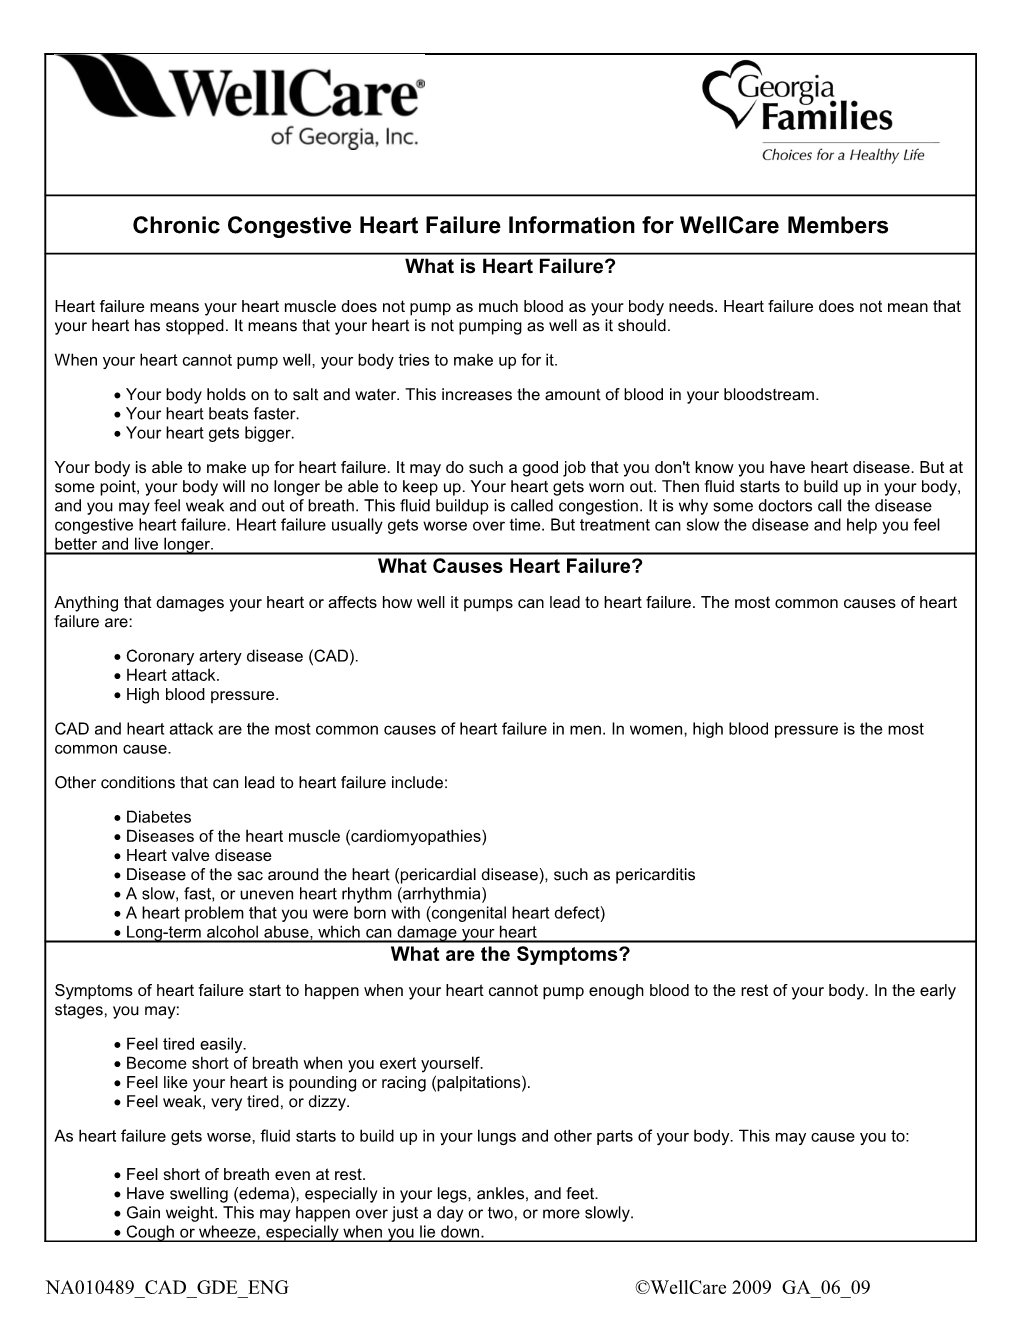 Chronic Congestive Heart Failure Information for Wellcare Members